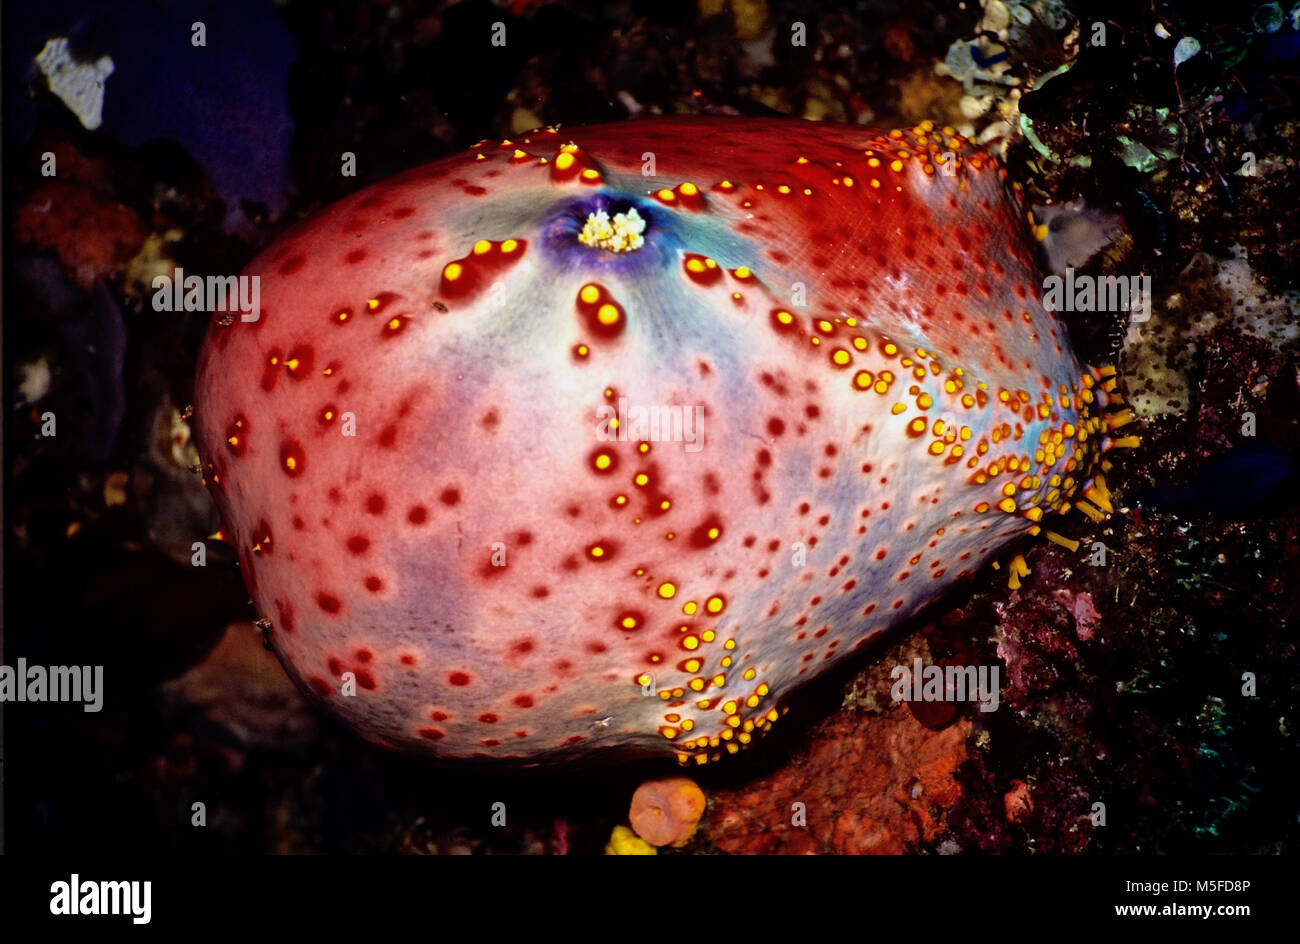 The colour and shape of this holothurian (Pseudocolochirus violaceus: 10 cms.) has led to its common name of sea apple. As with starfish and sea urchins, it travels slowly on the substrate by means of its many hydraulically operated tube feet. To move more swiftly - for example if threatened - it can double its size by taking in sea water and then launching itself into the current. It feeds at night on microplankton, using tentacles around its central mouth to capture its prey. This individual was resting during the day, with its tentacles tucked into its central area. Rinca island, Indonesia. Stock Photo